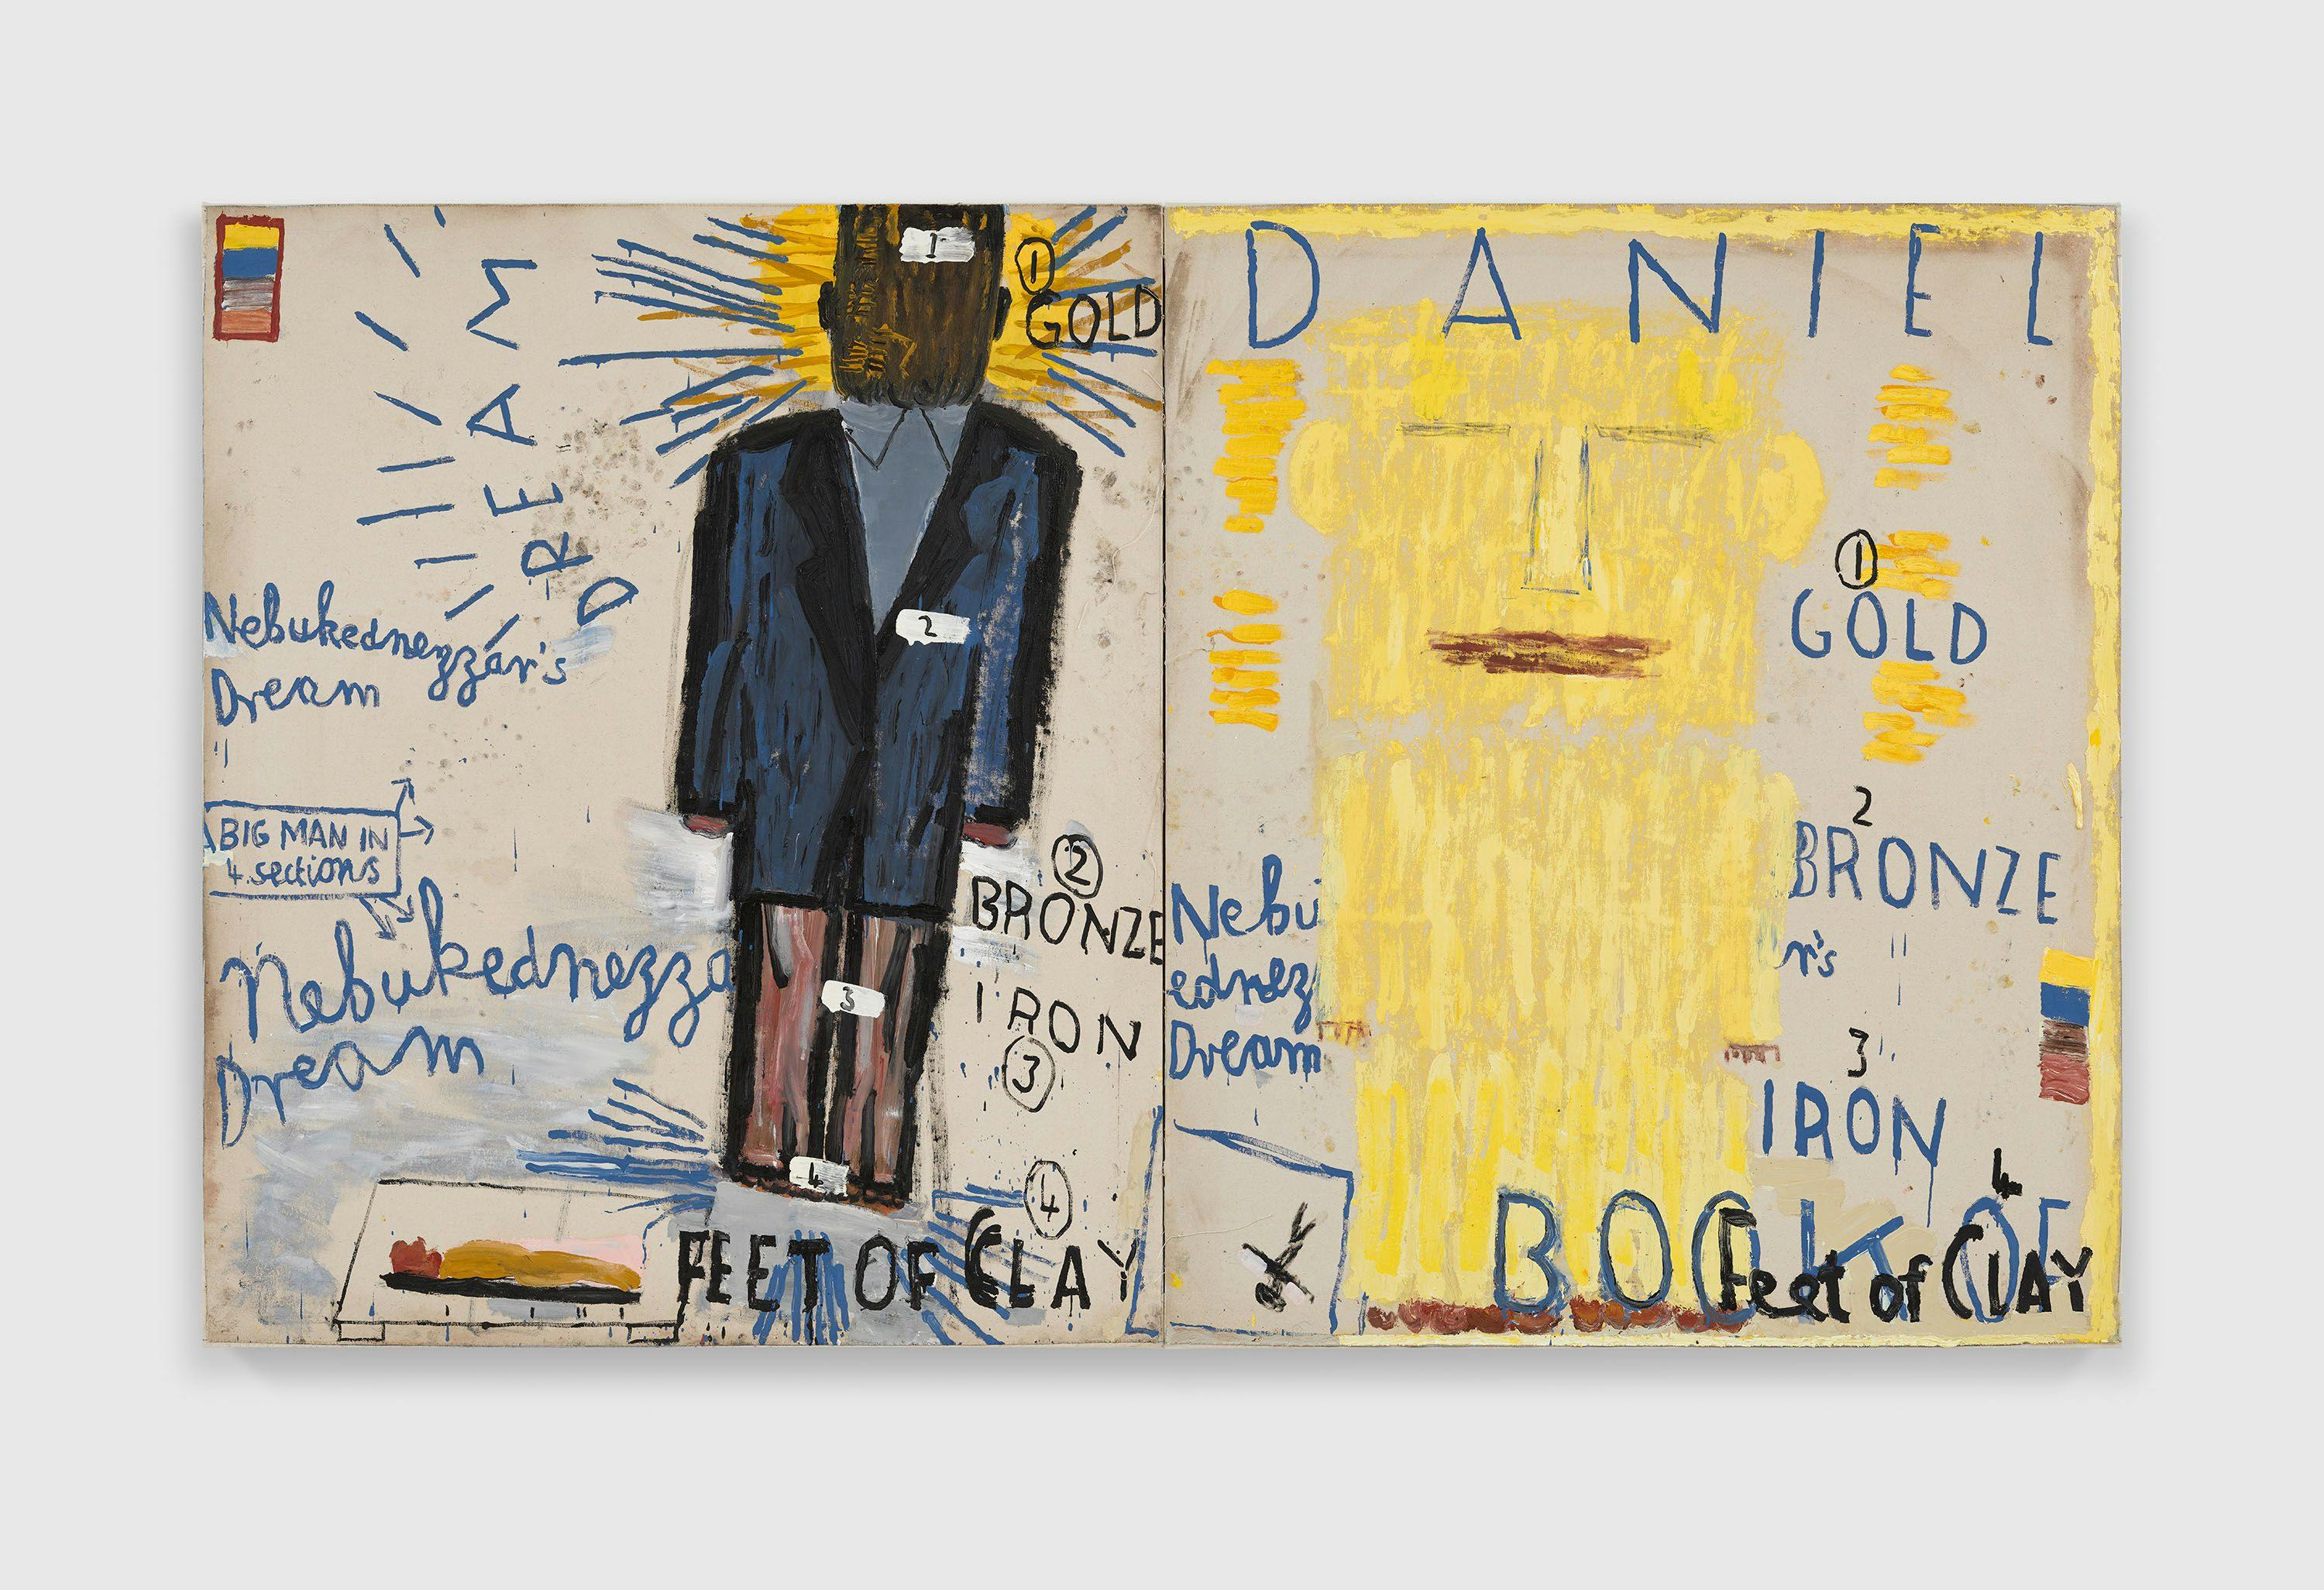 A painting by Rose Wylie, titled Neb's Dream, dated 2023.